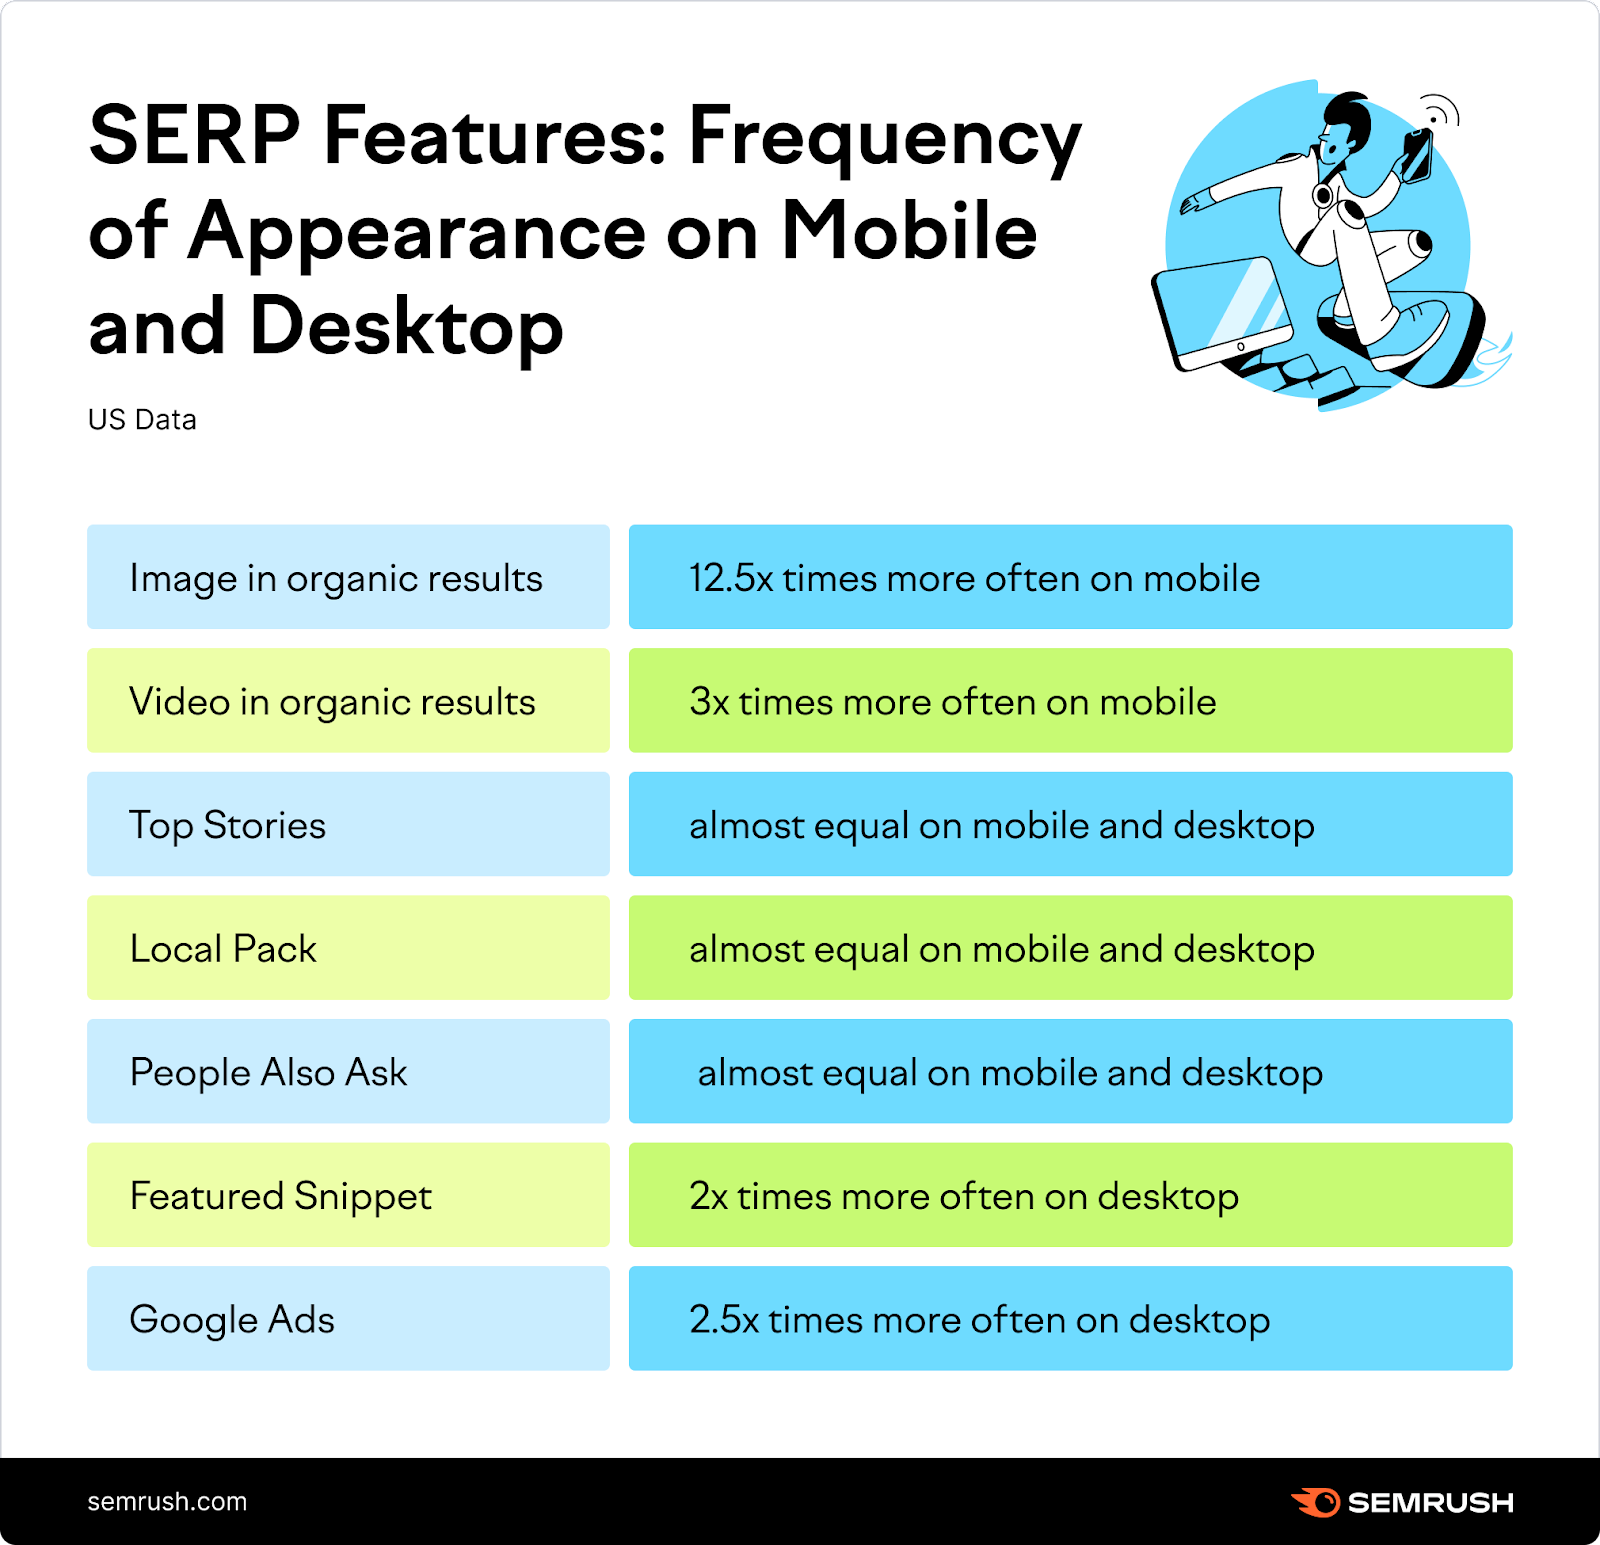 An infographic on SERP features: frequency of appearance on mobile and desktop